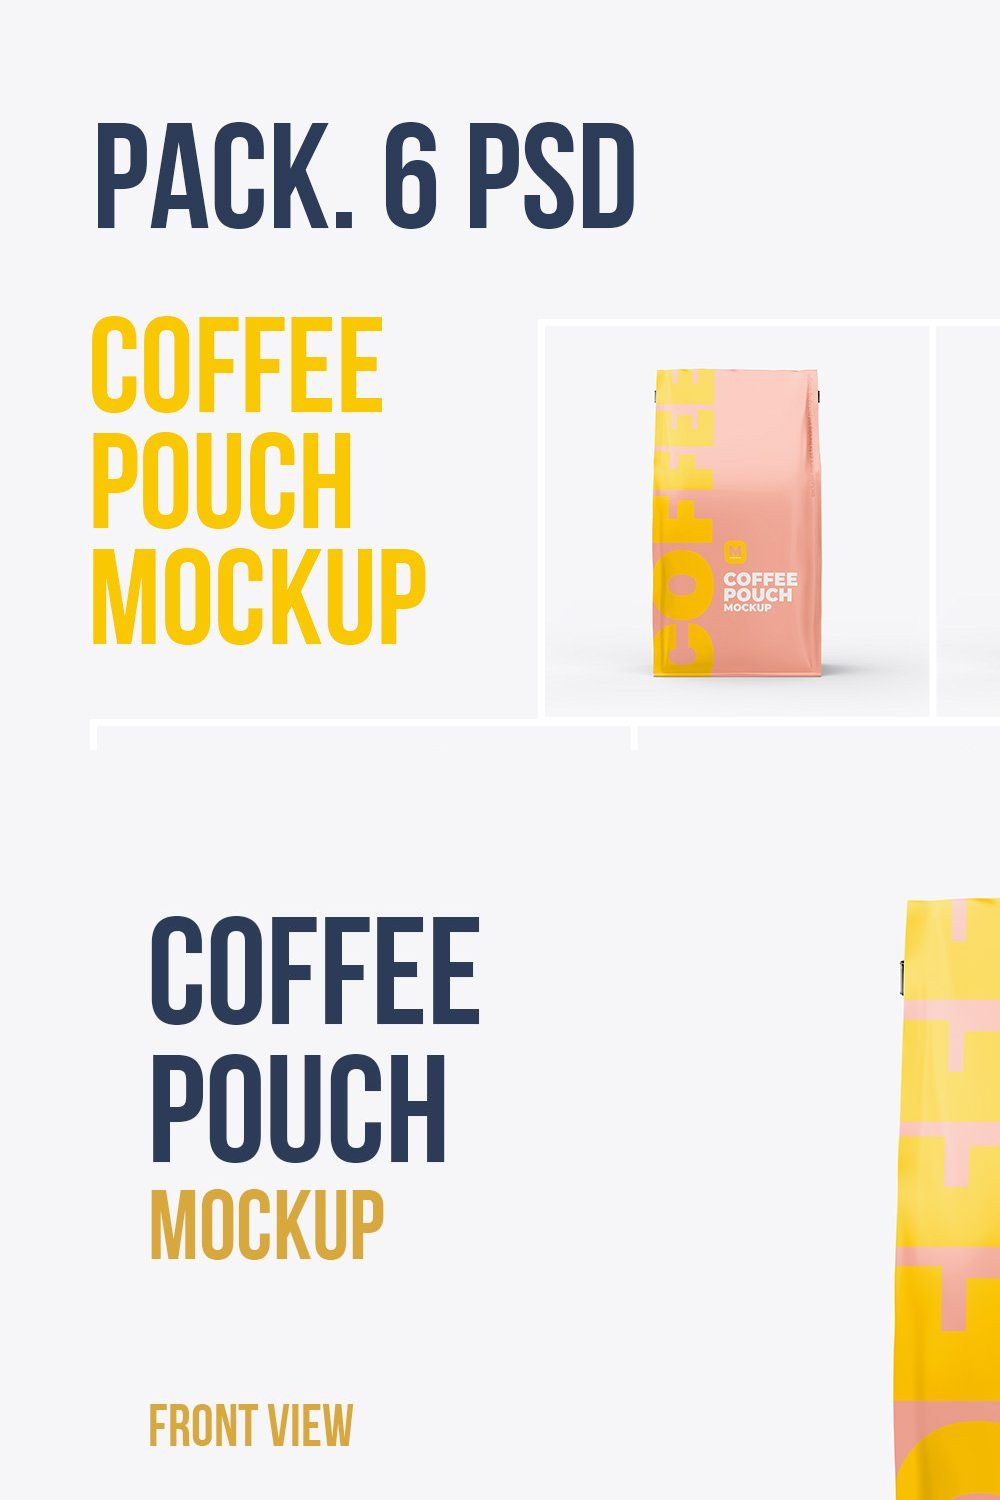 Coffee pouch mockup. Pack 6 PSD pinterest preview image.